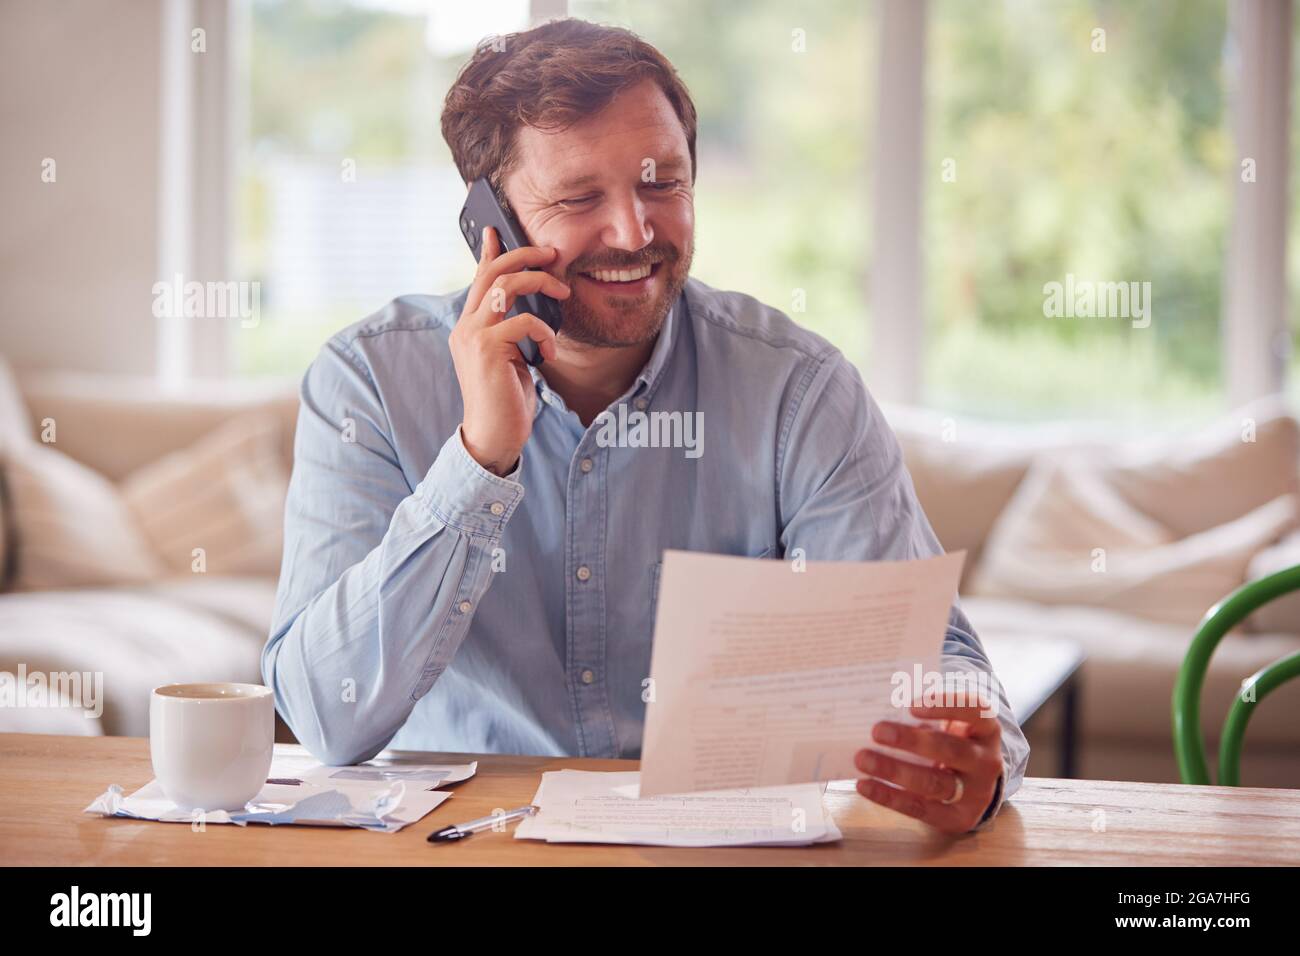 Smiling Man On Phone Call Sitting At Table At Home Reviewing Domestic Finances Stock Photo